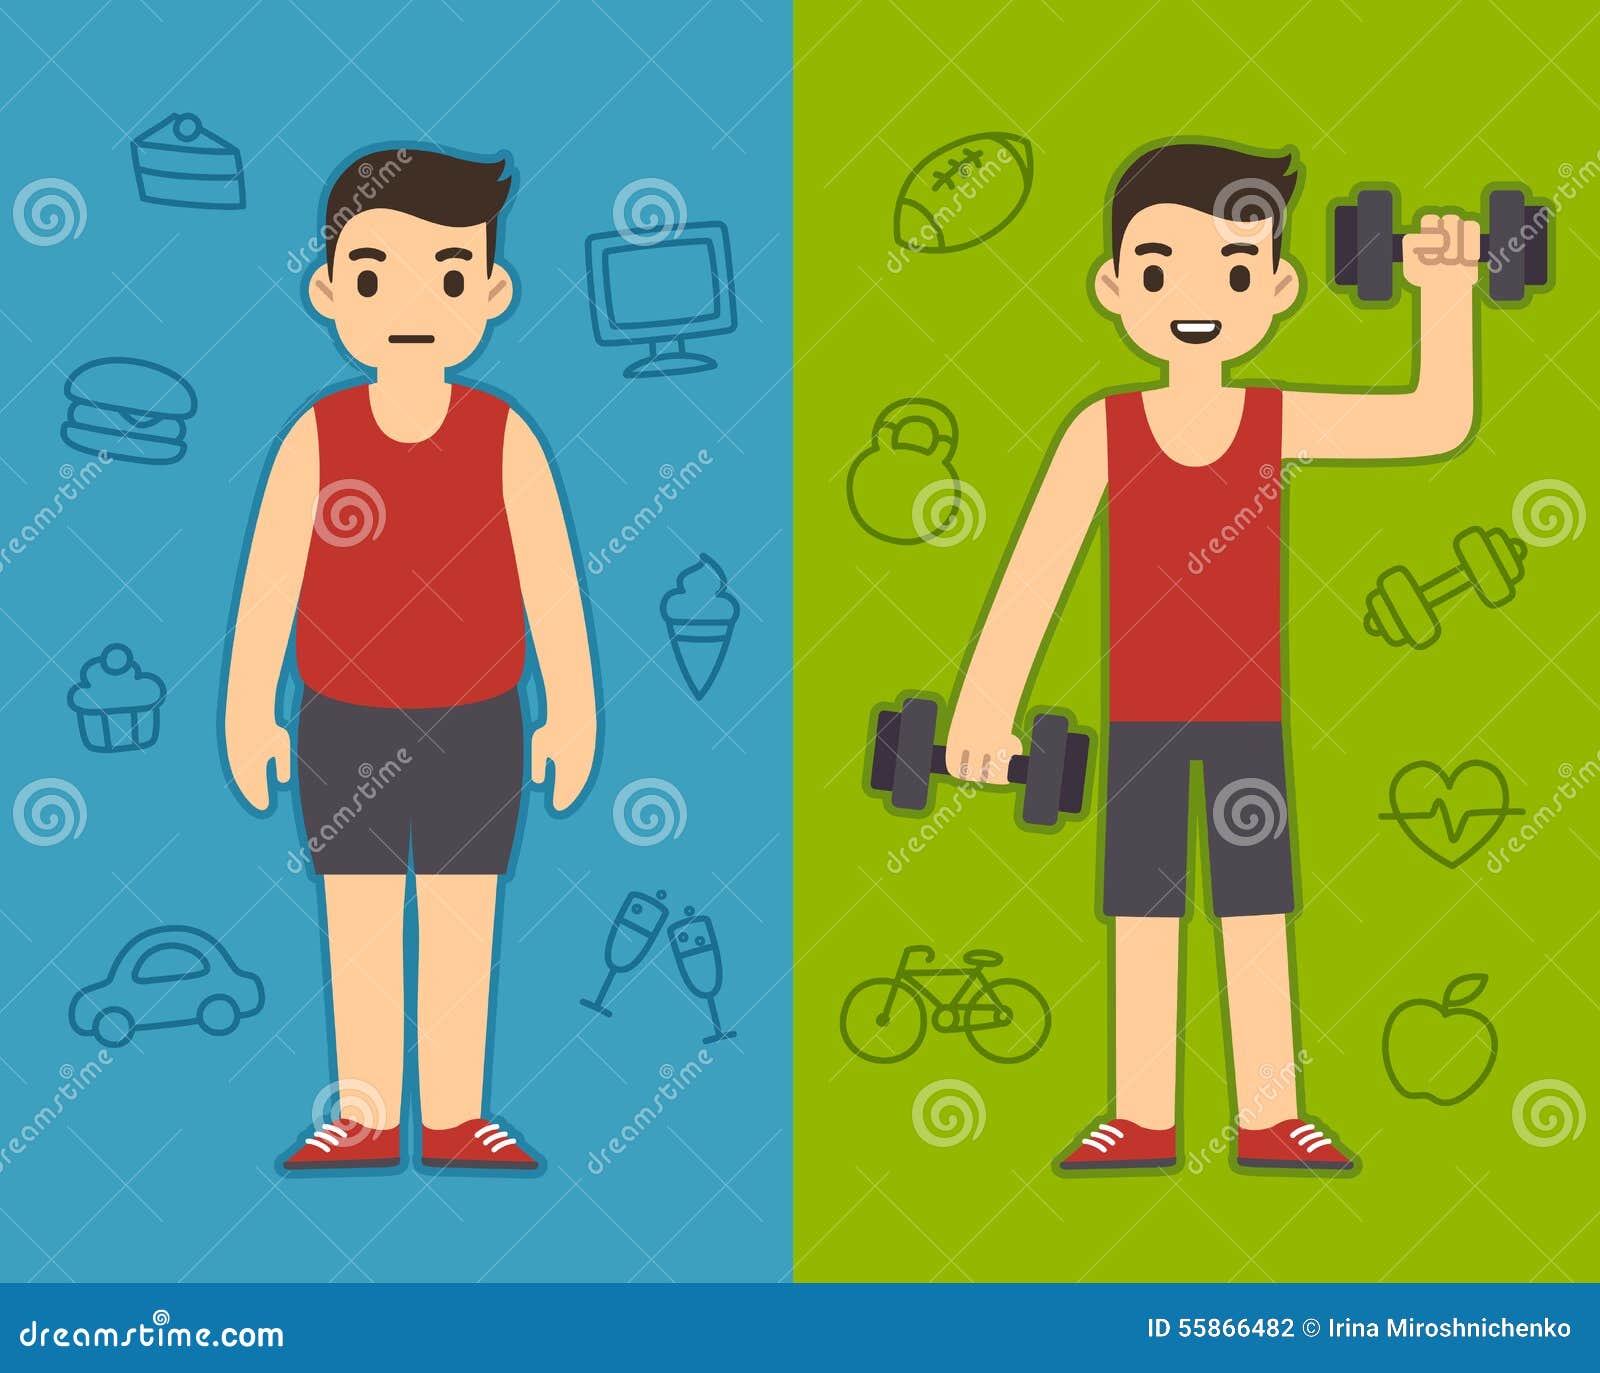 Fat And Fit Man Stock Illustration - Image: 55866482